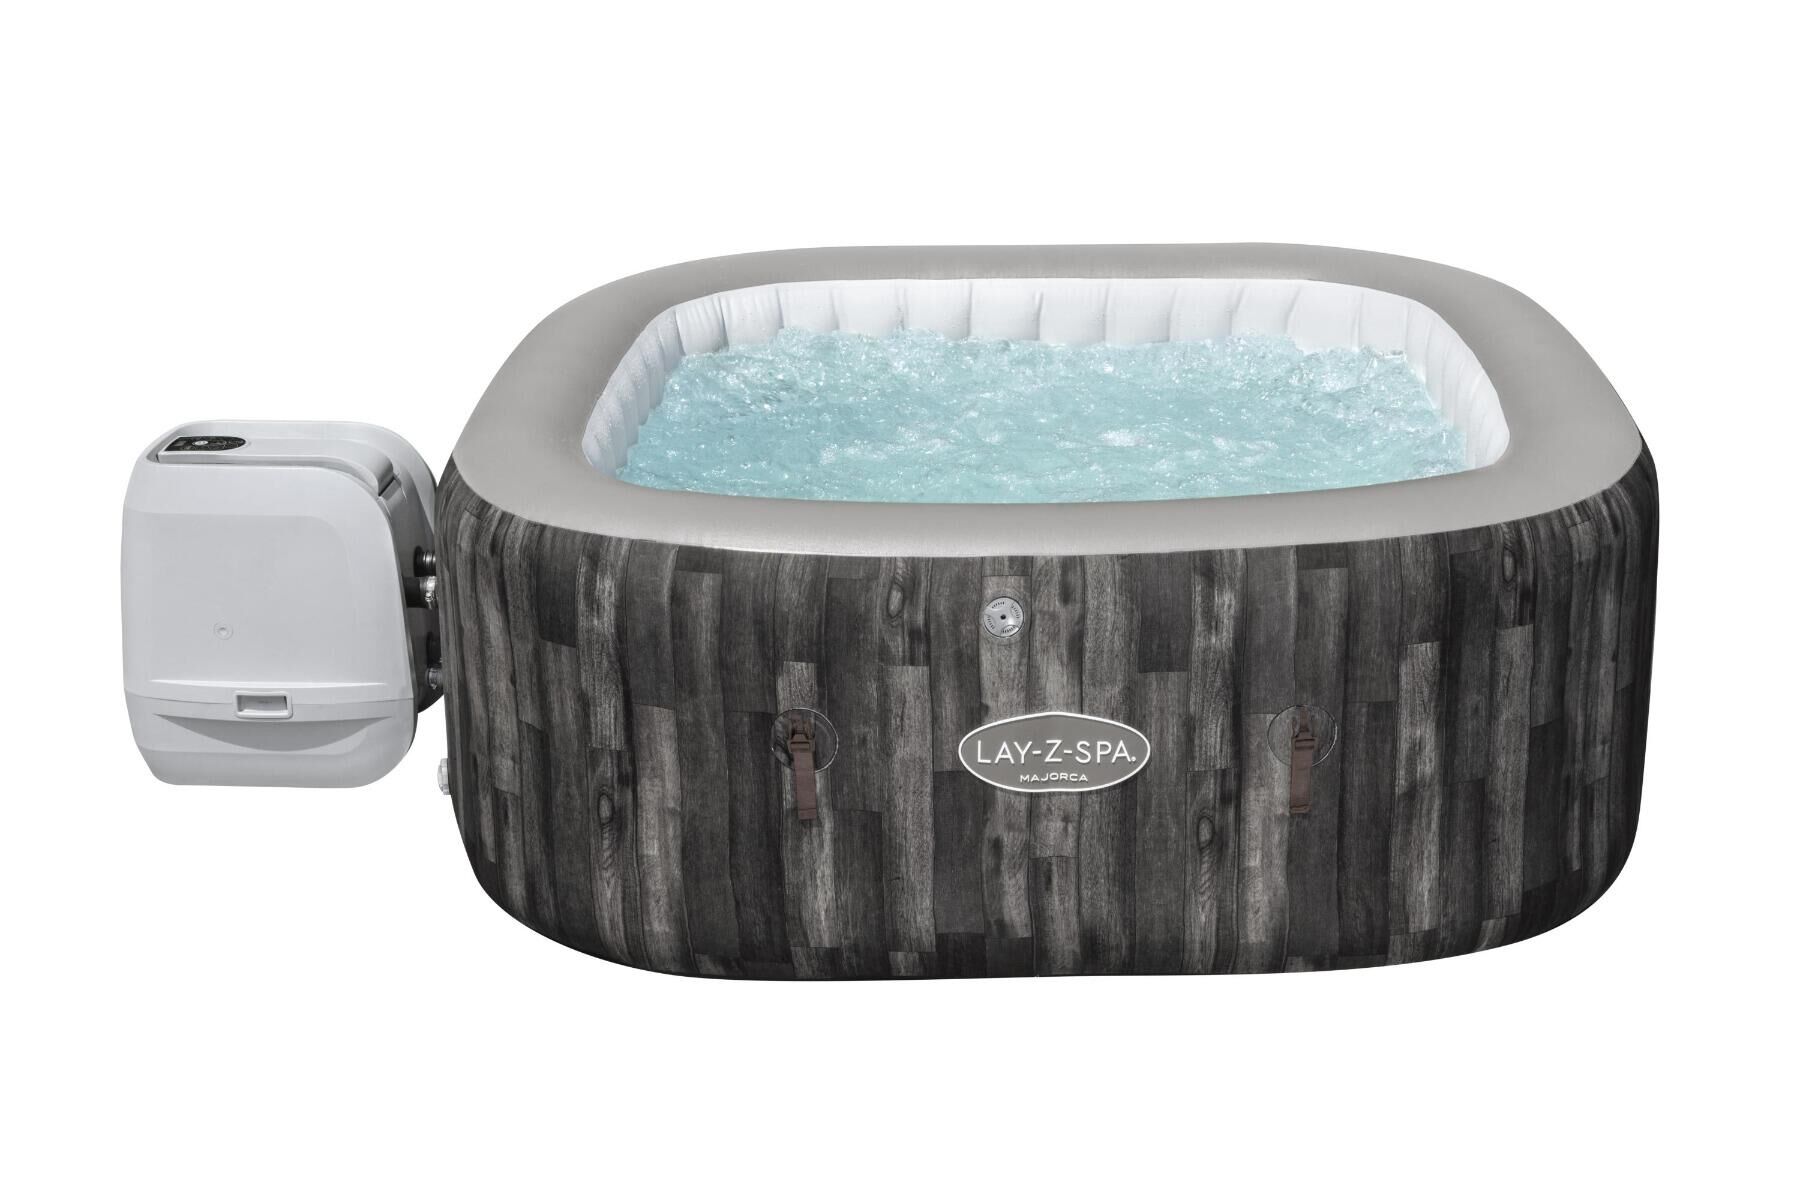 Lay-Z-Spa Lay-Z-Spa Majorca Hydrojet Pro |Inflatable Hot Tub, Brown